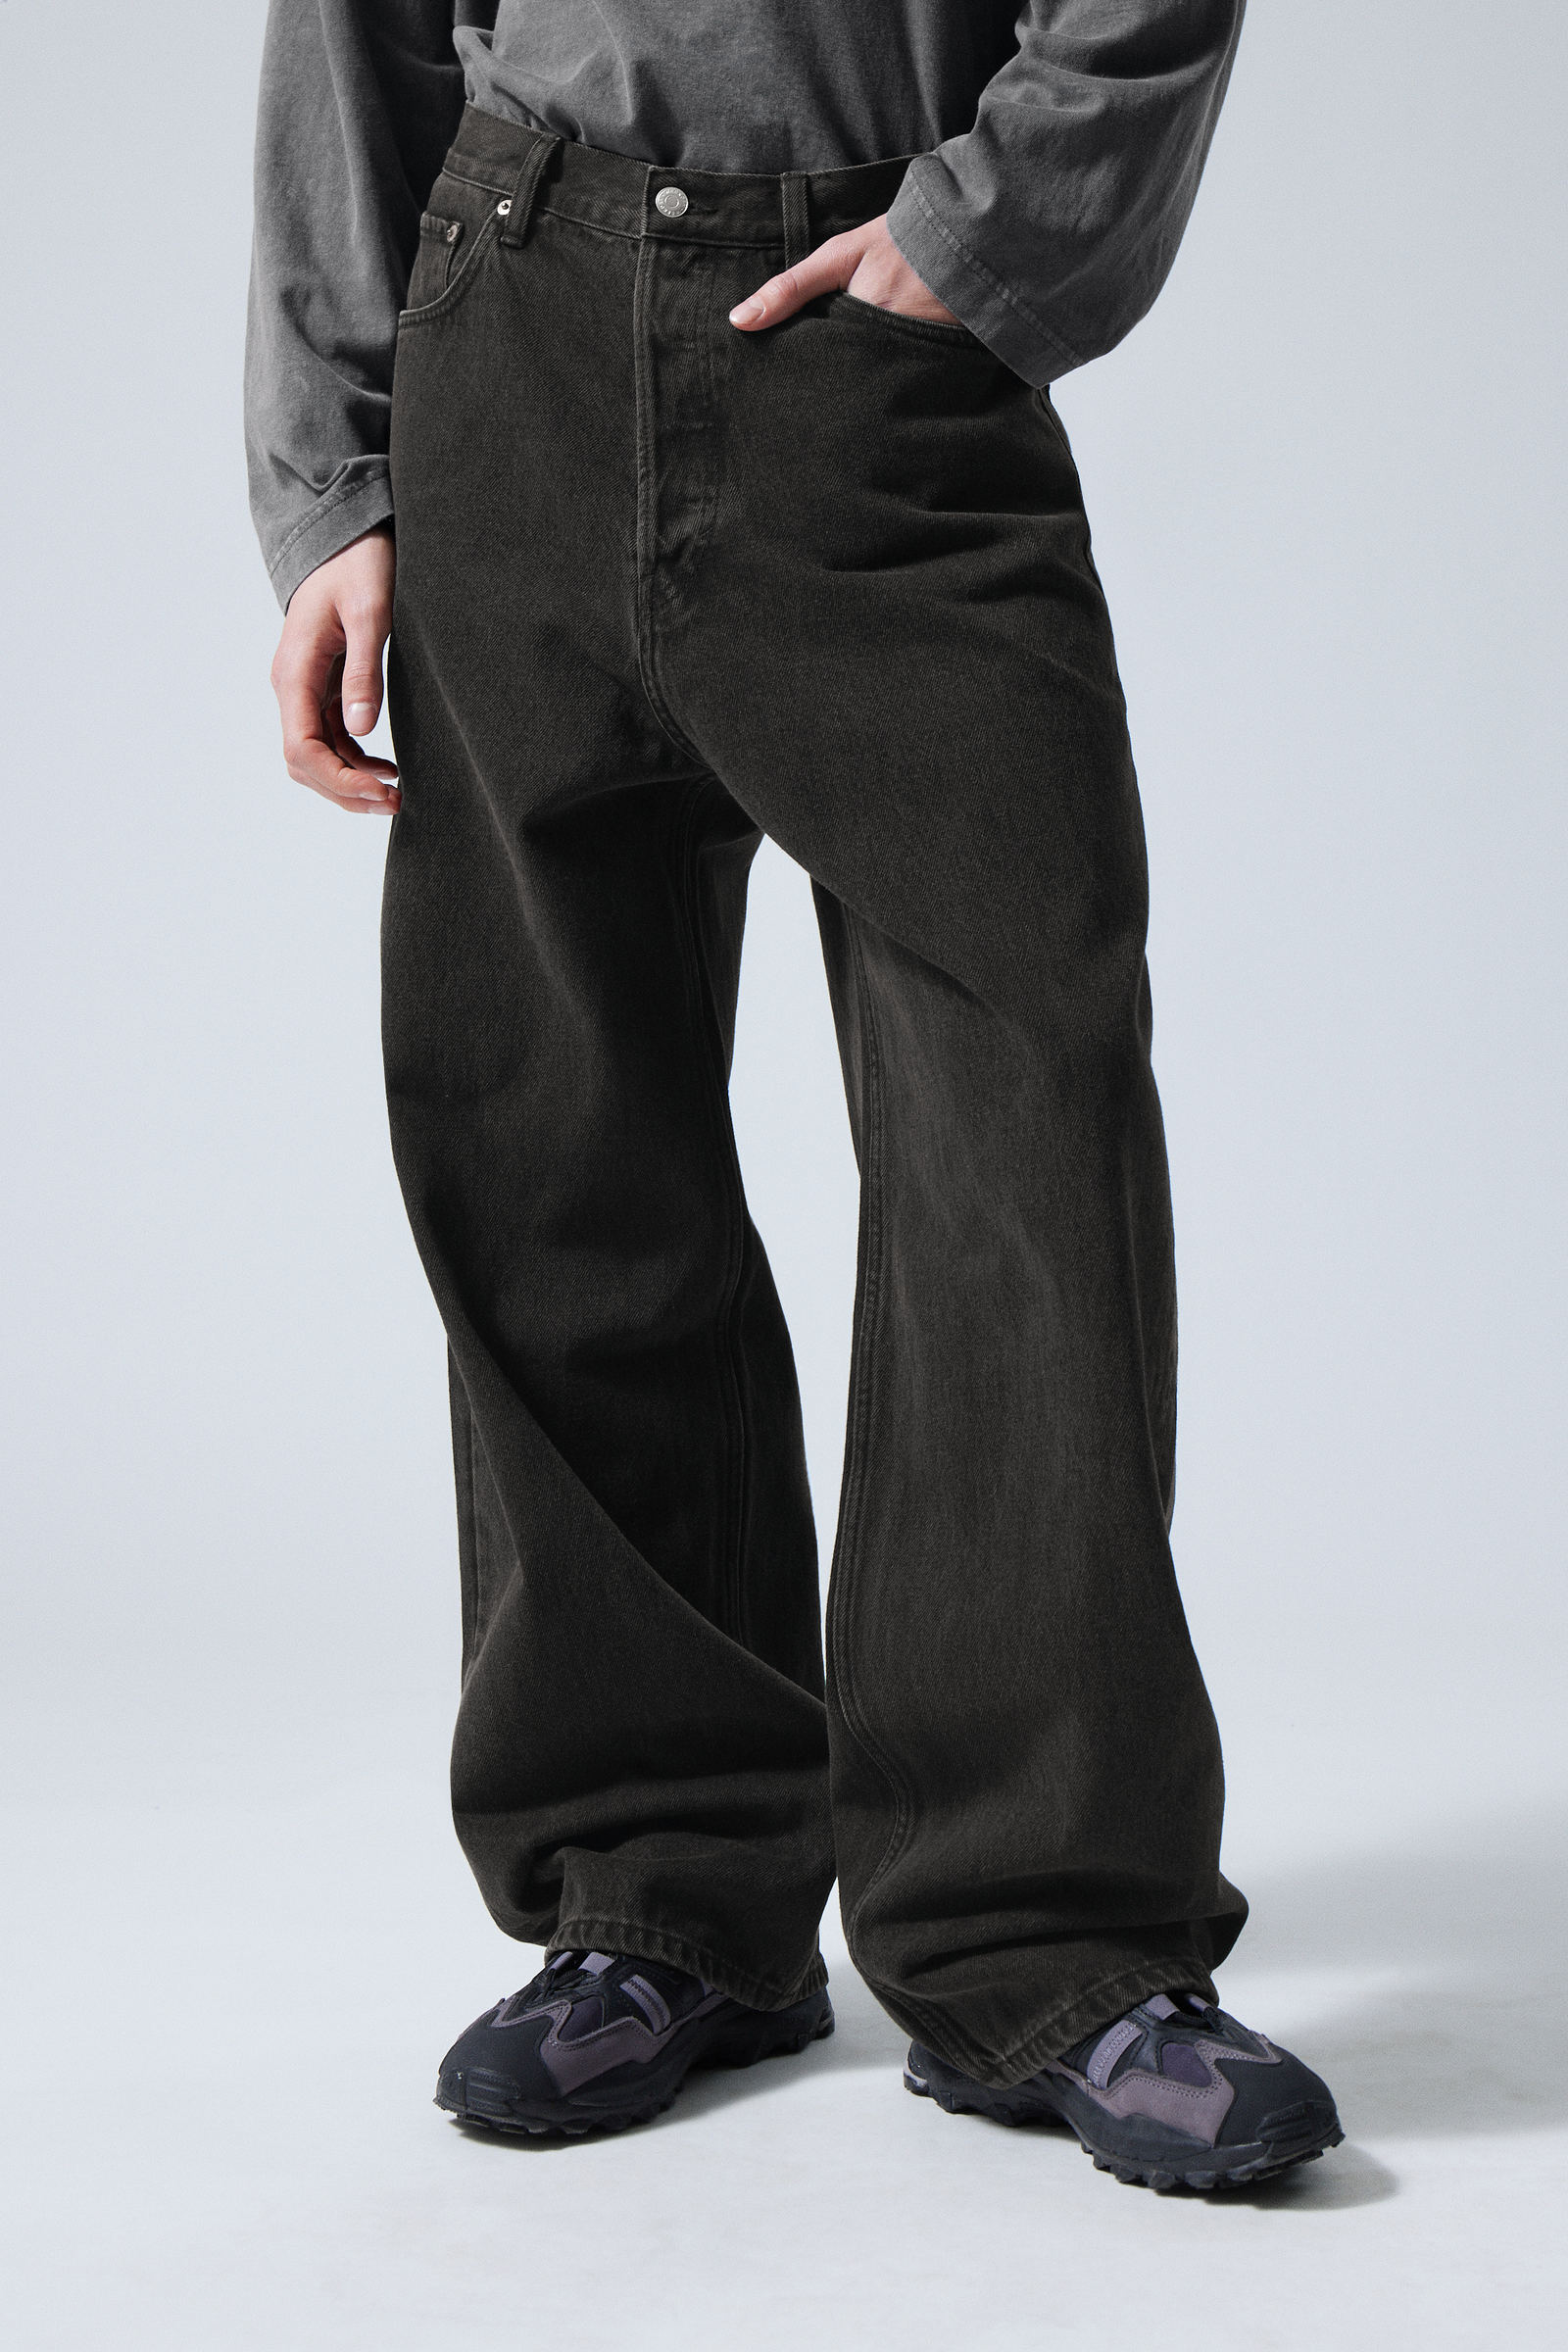 astro loose baggy jeans - Tuned Black | Weekday DK